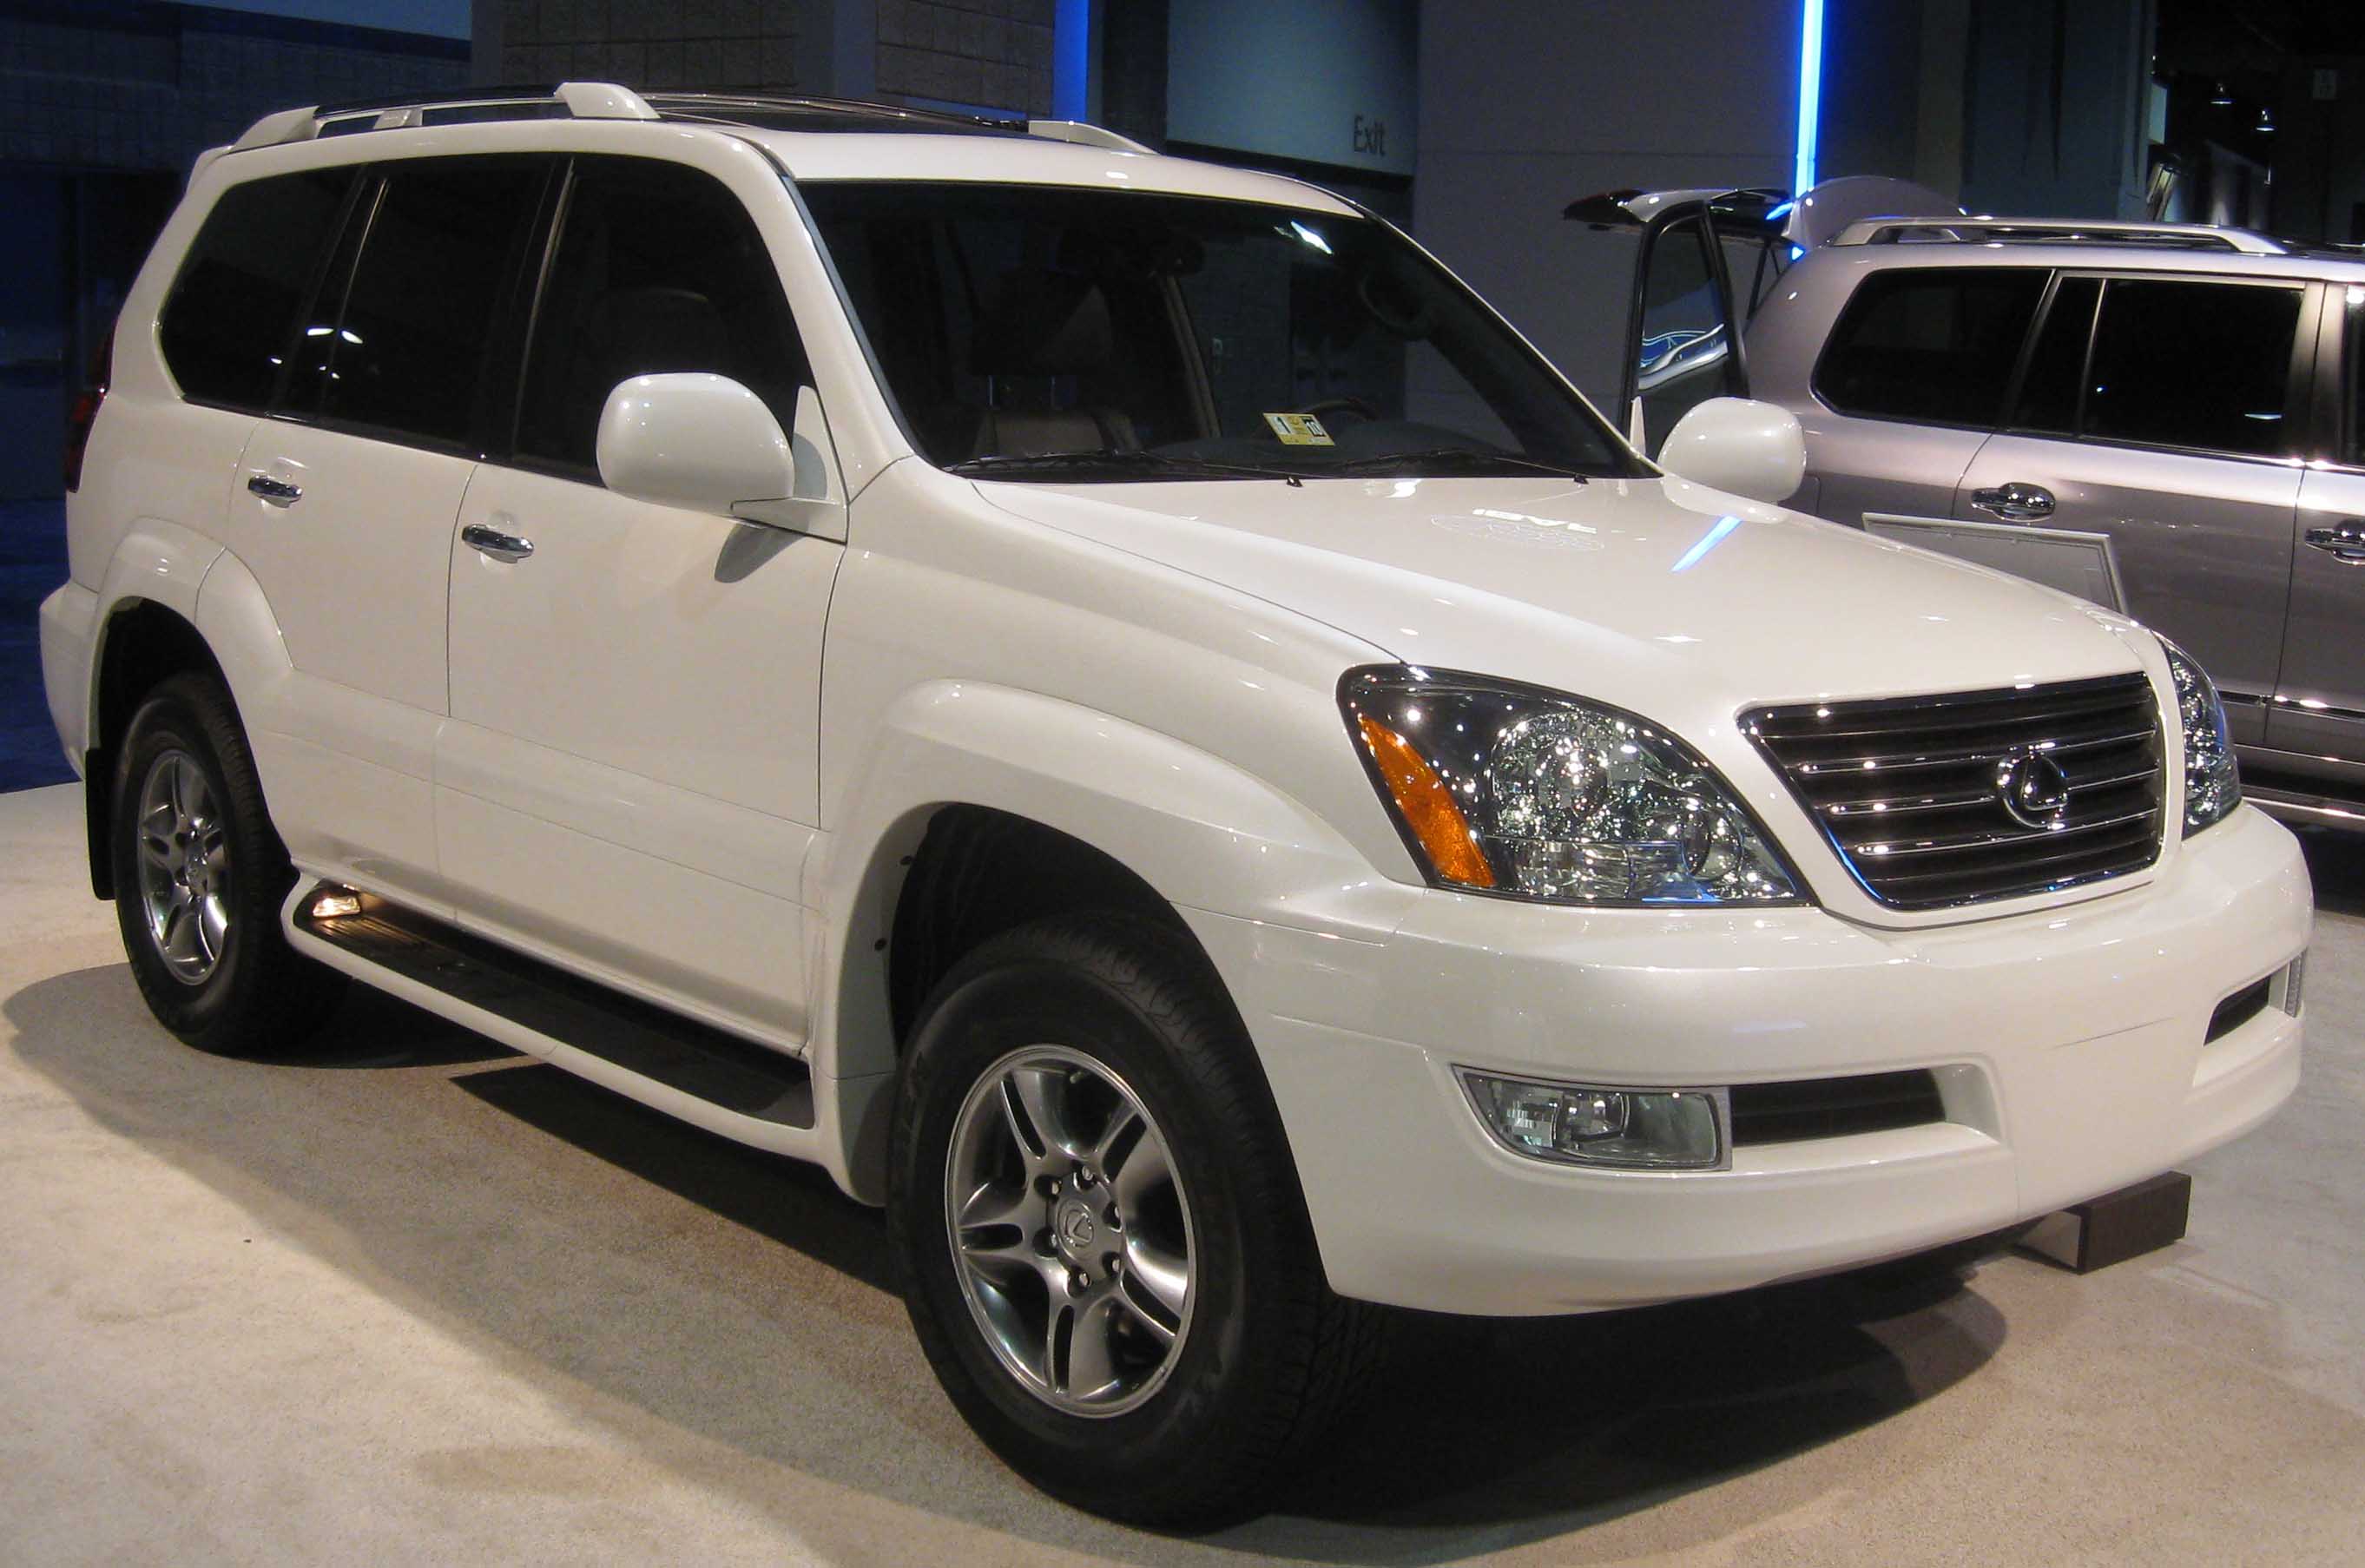 LEXUS GX - Review and photos